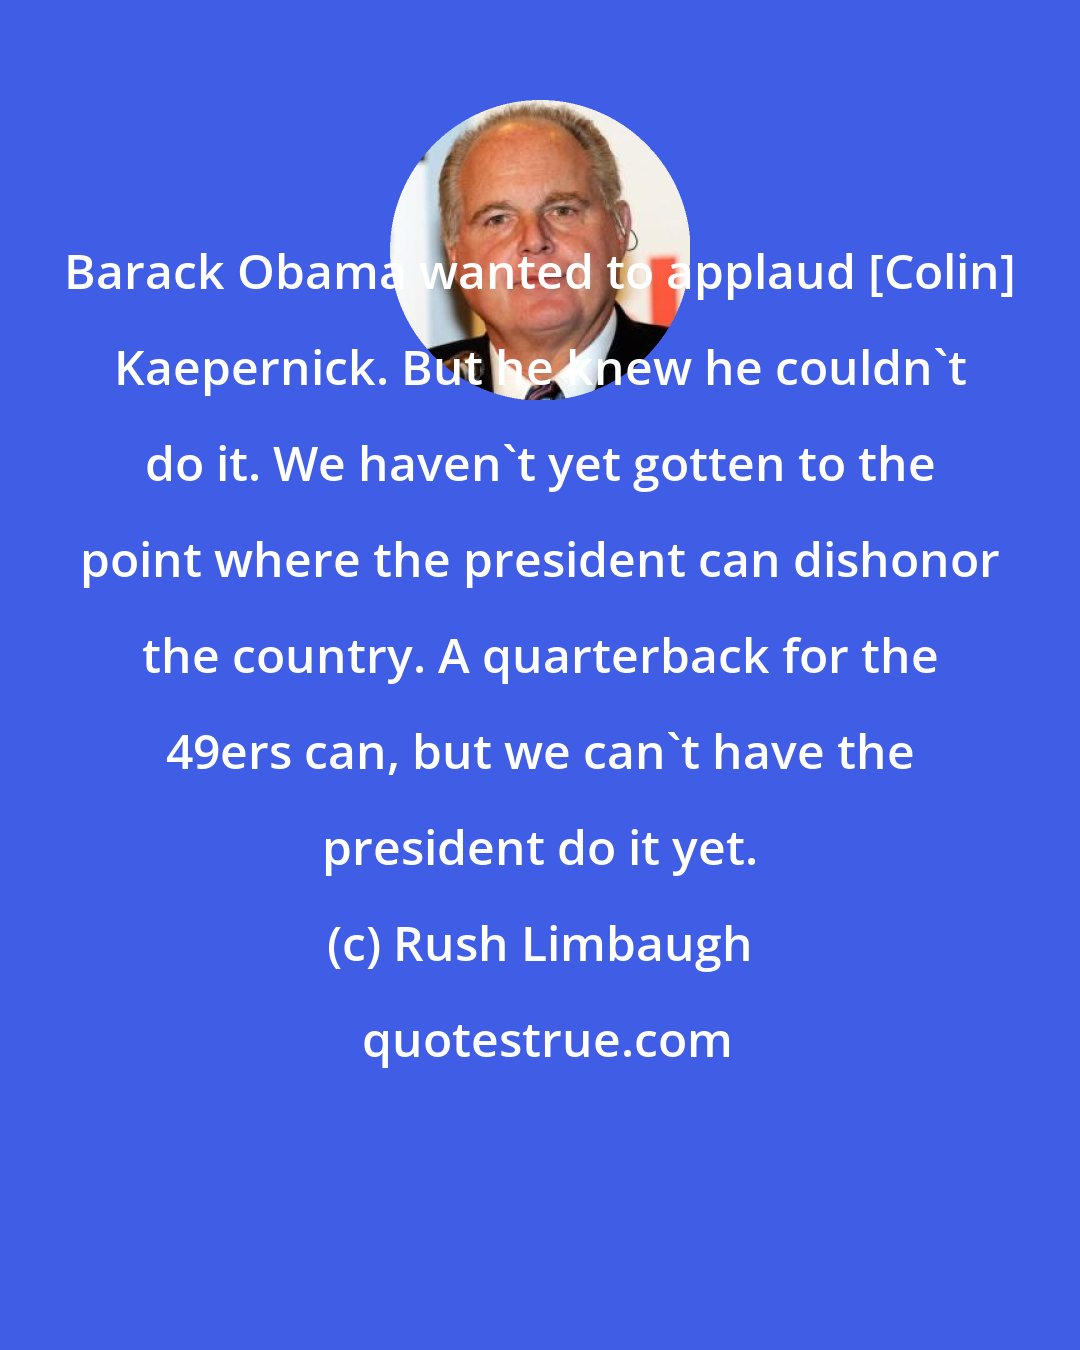 Rush Limbaugh: Barack Obama wanted to applaud [Colin] Kaepernick. But he knew he couldn't do it. We haven't yet gotten to the point where the president can dishonor the country. A quarterback for the 49ers can, but we can't have the president do it yet.